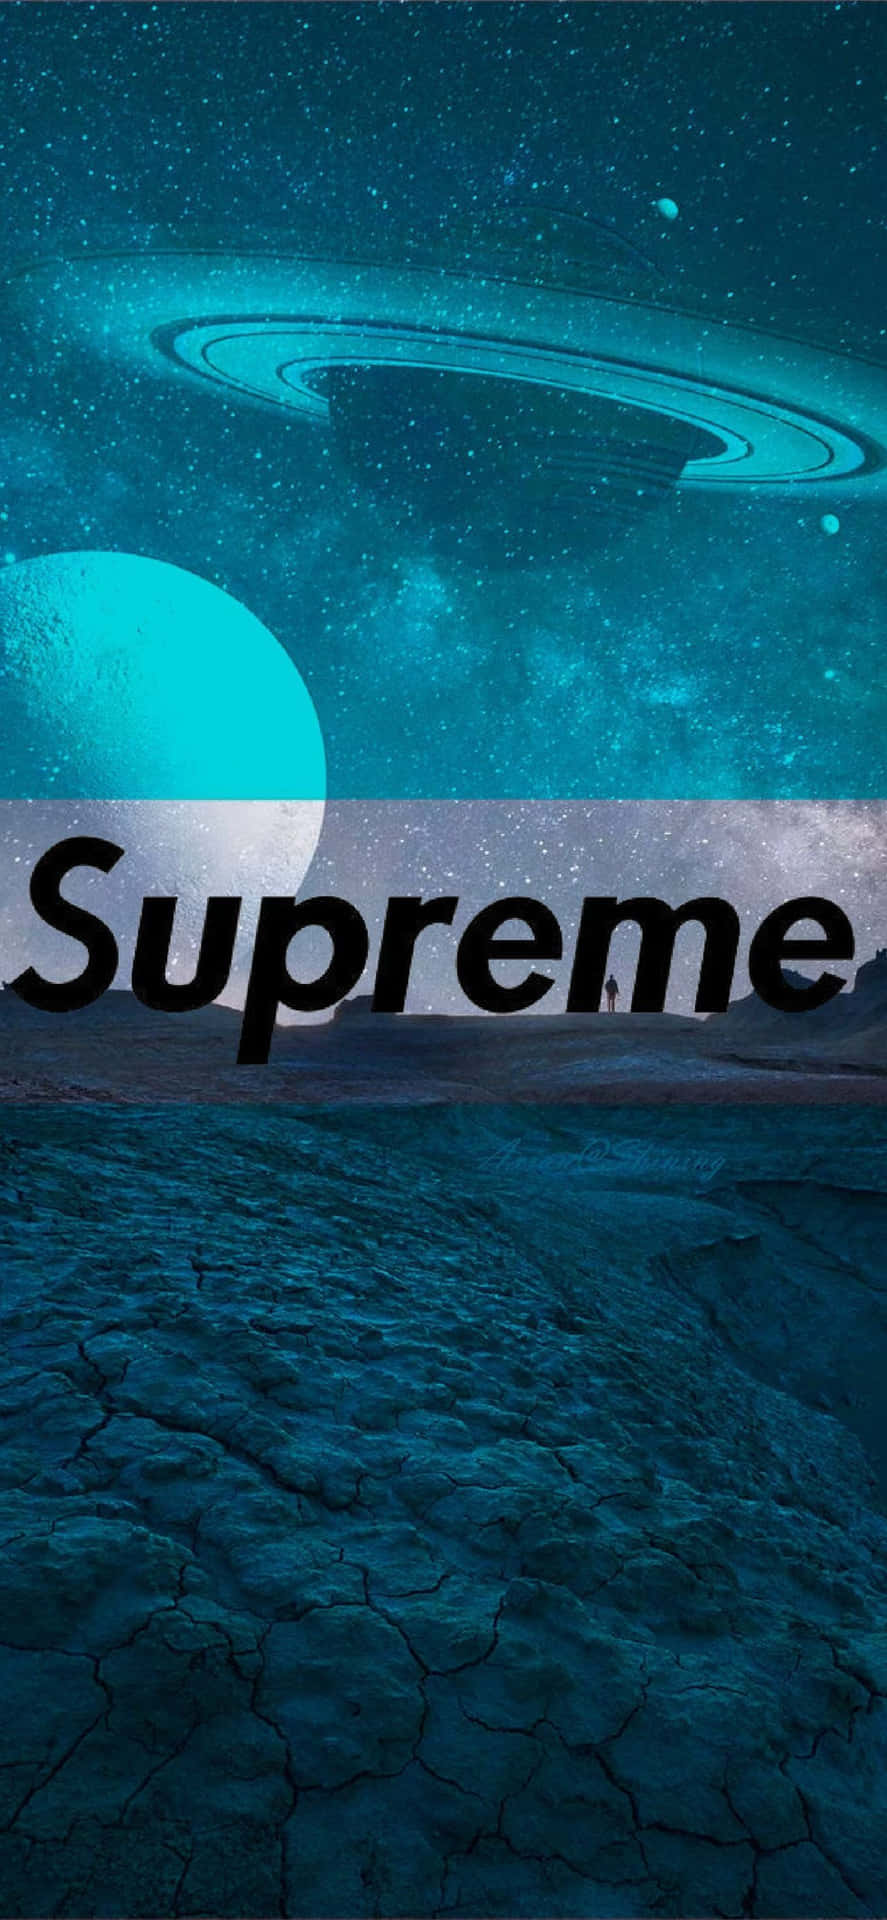 Supreme - A Planet With A Blue Sky Wallpaper